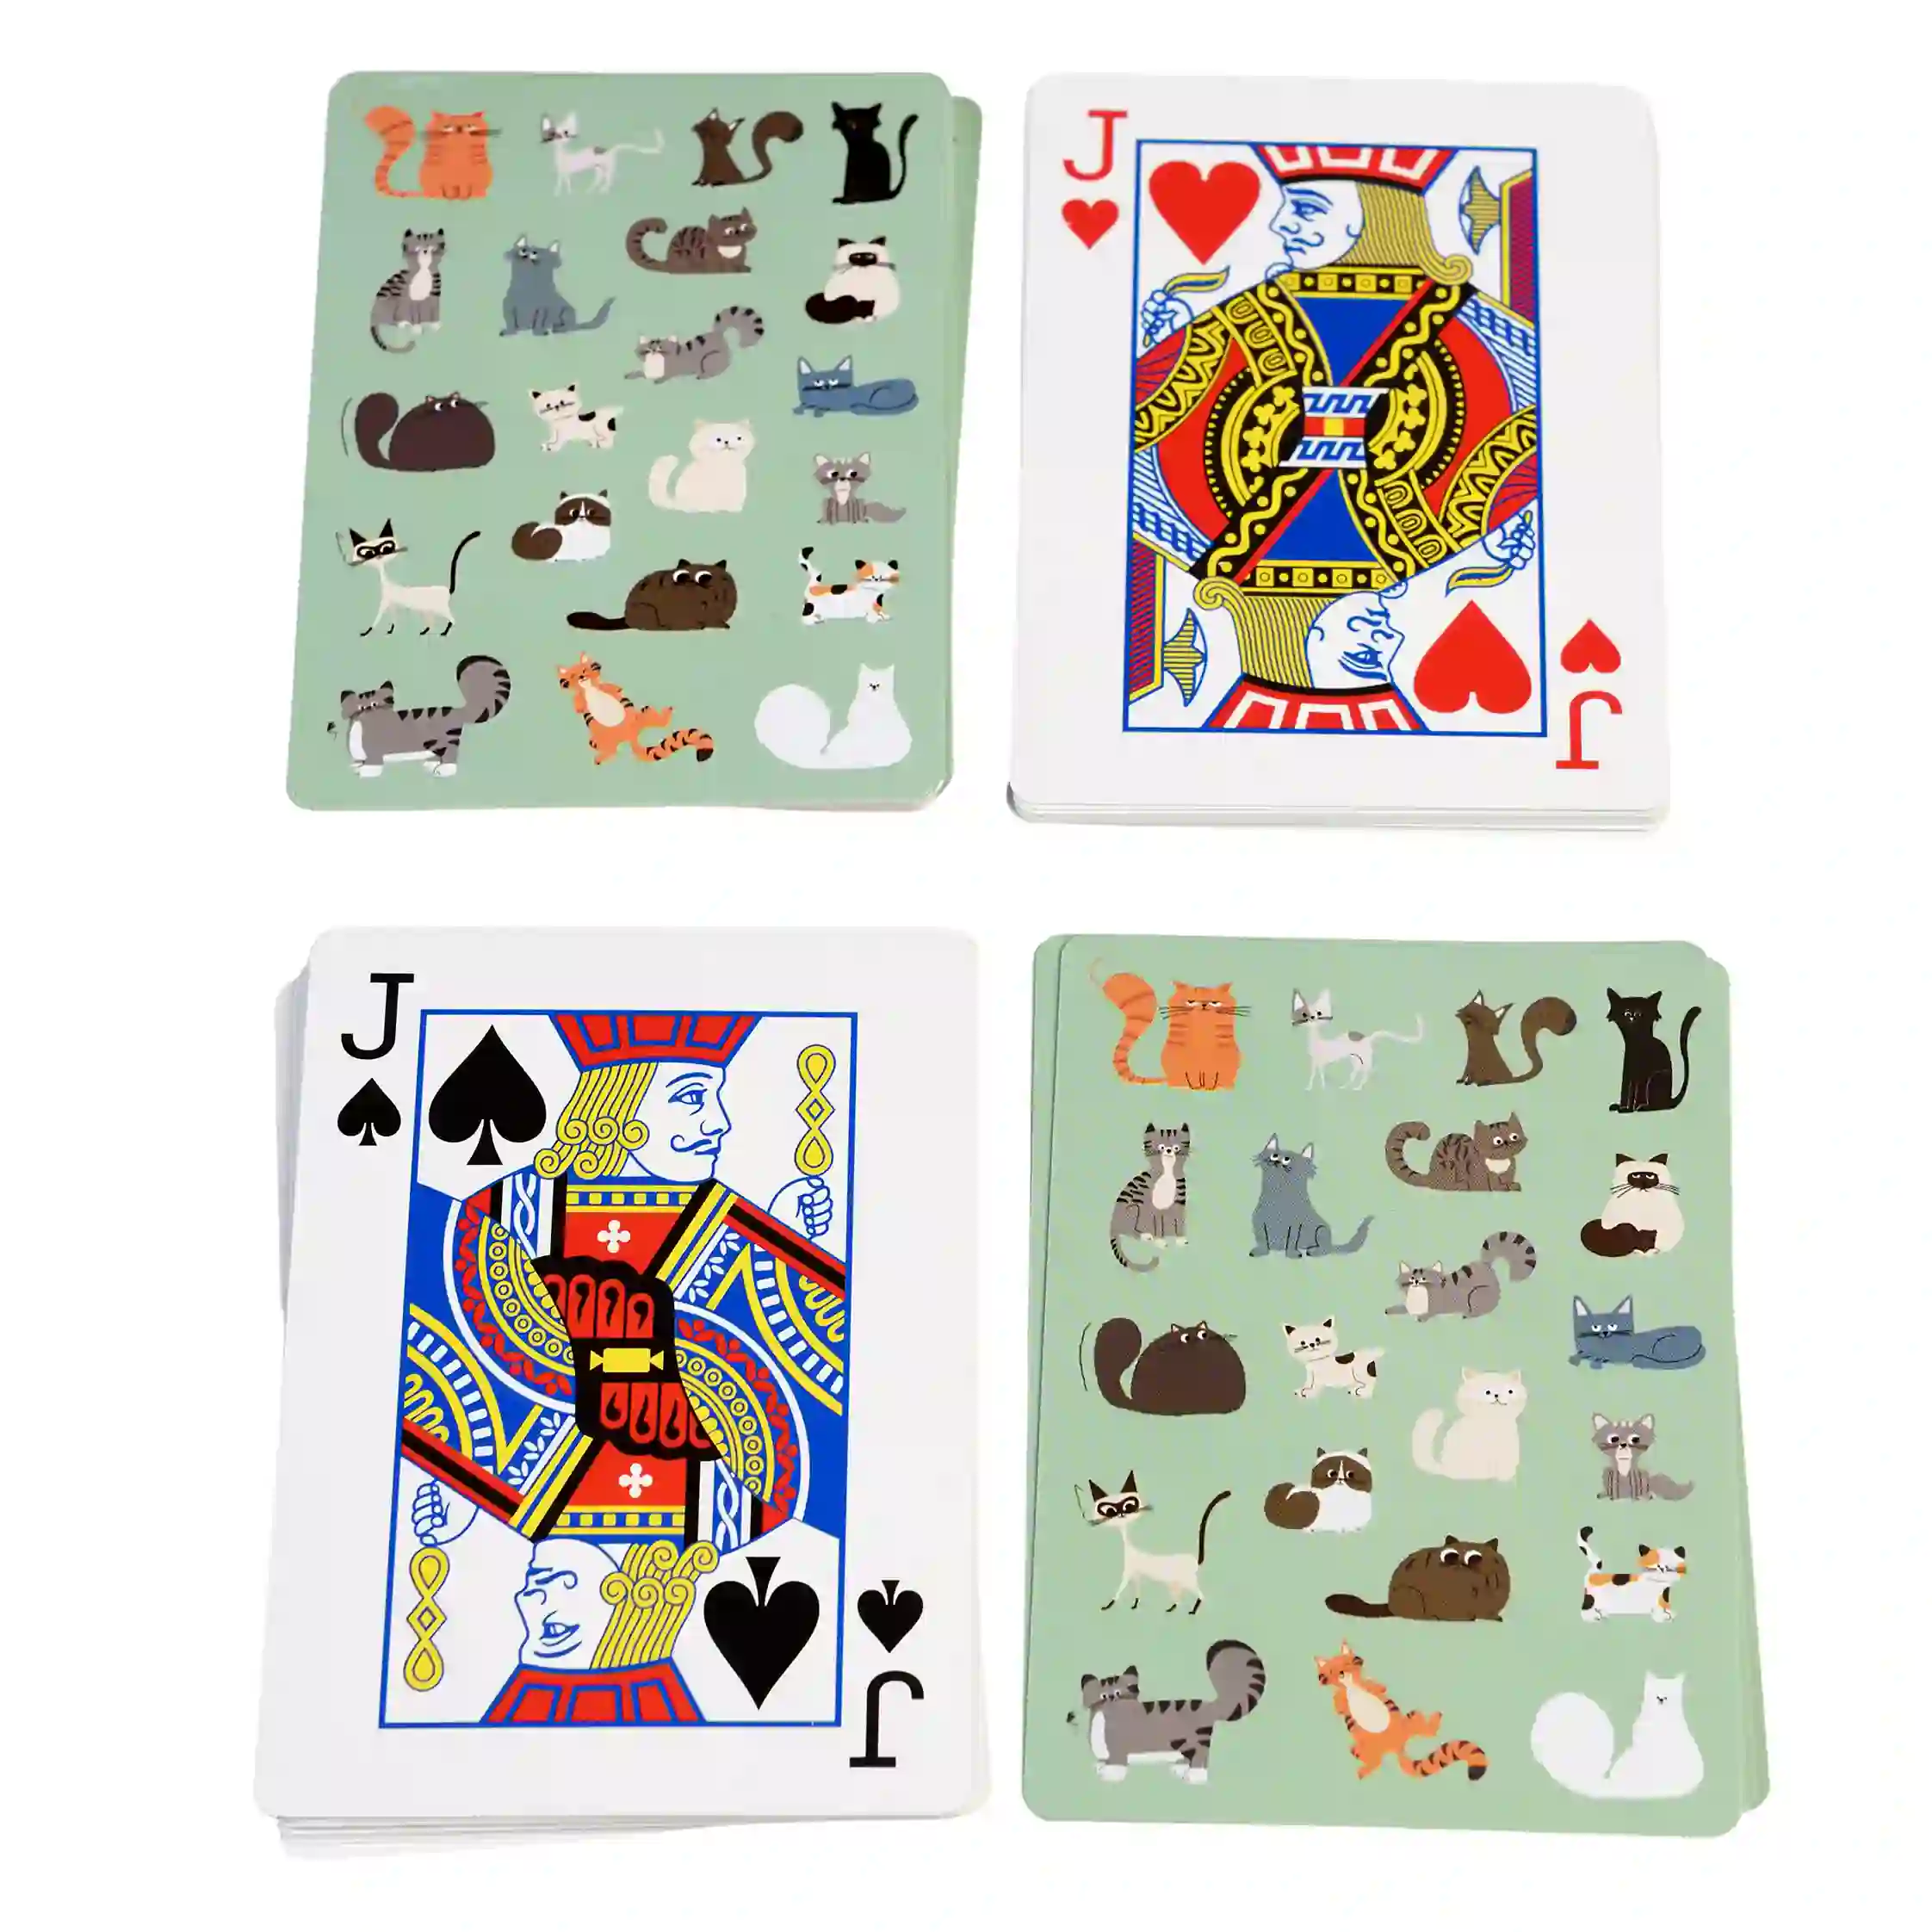 playing cards in a tin - nine lives